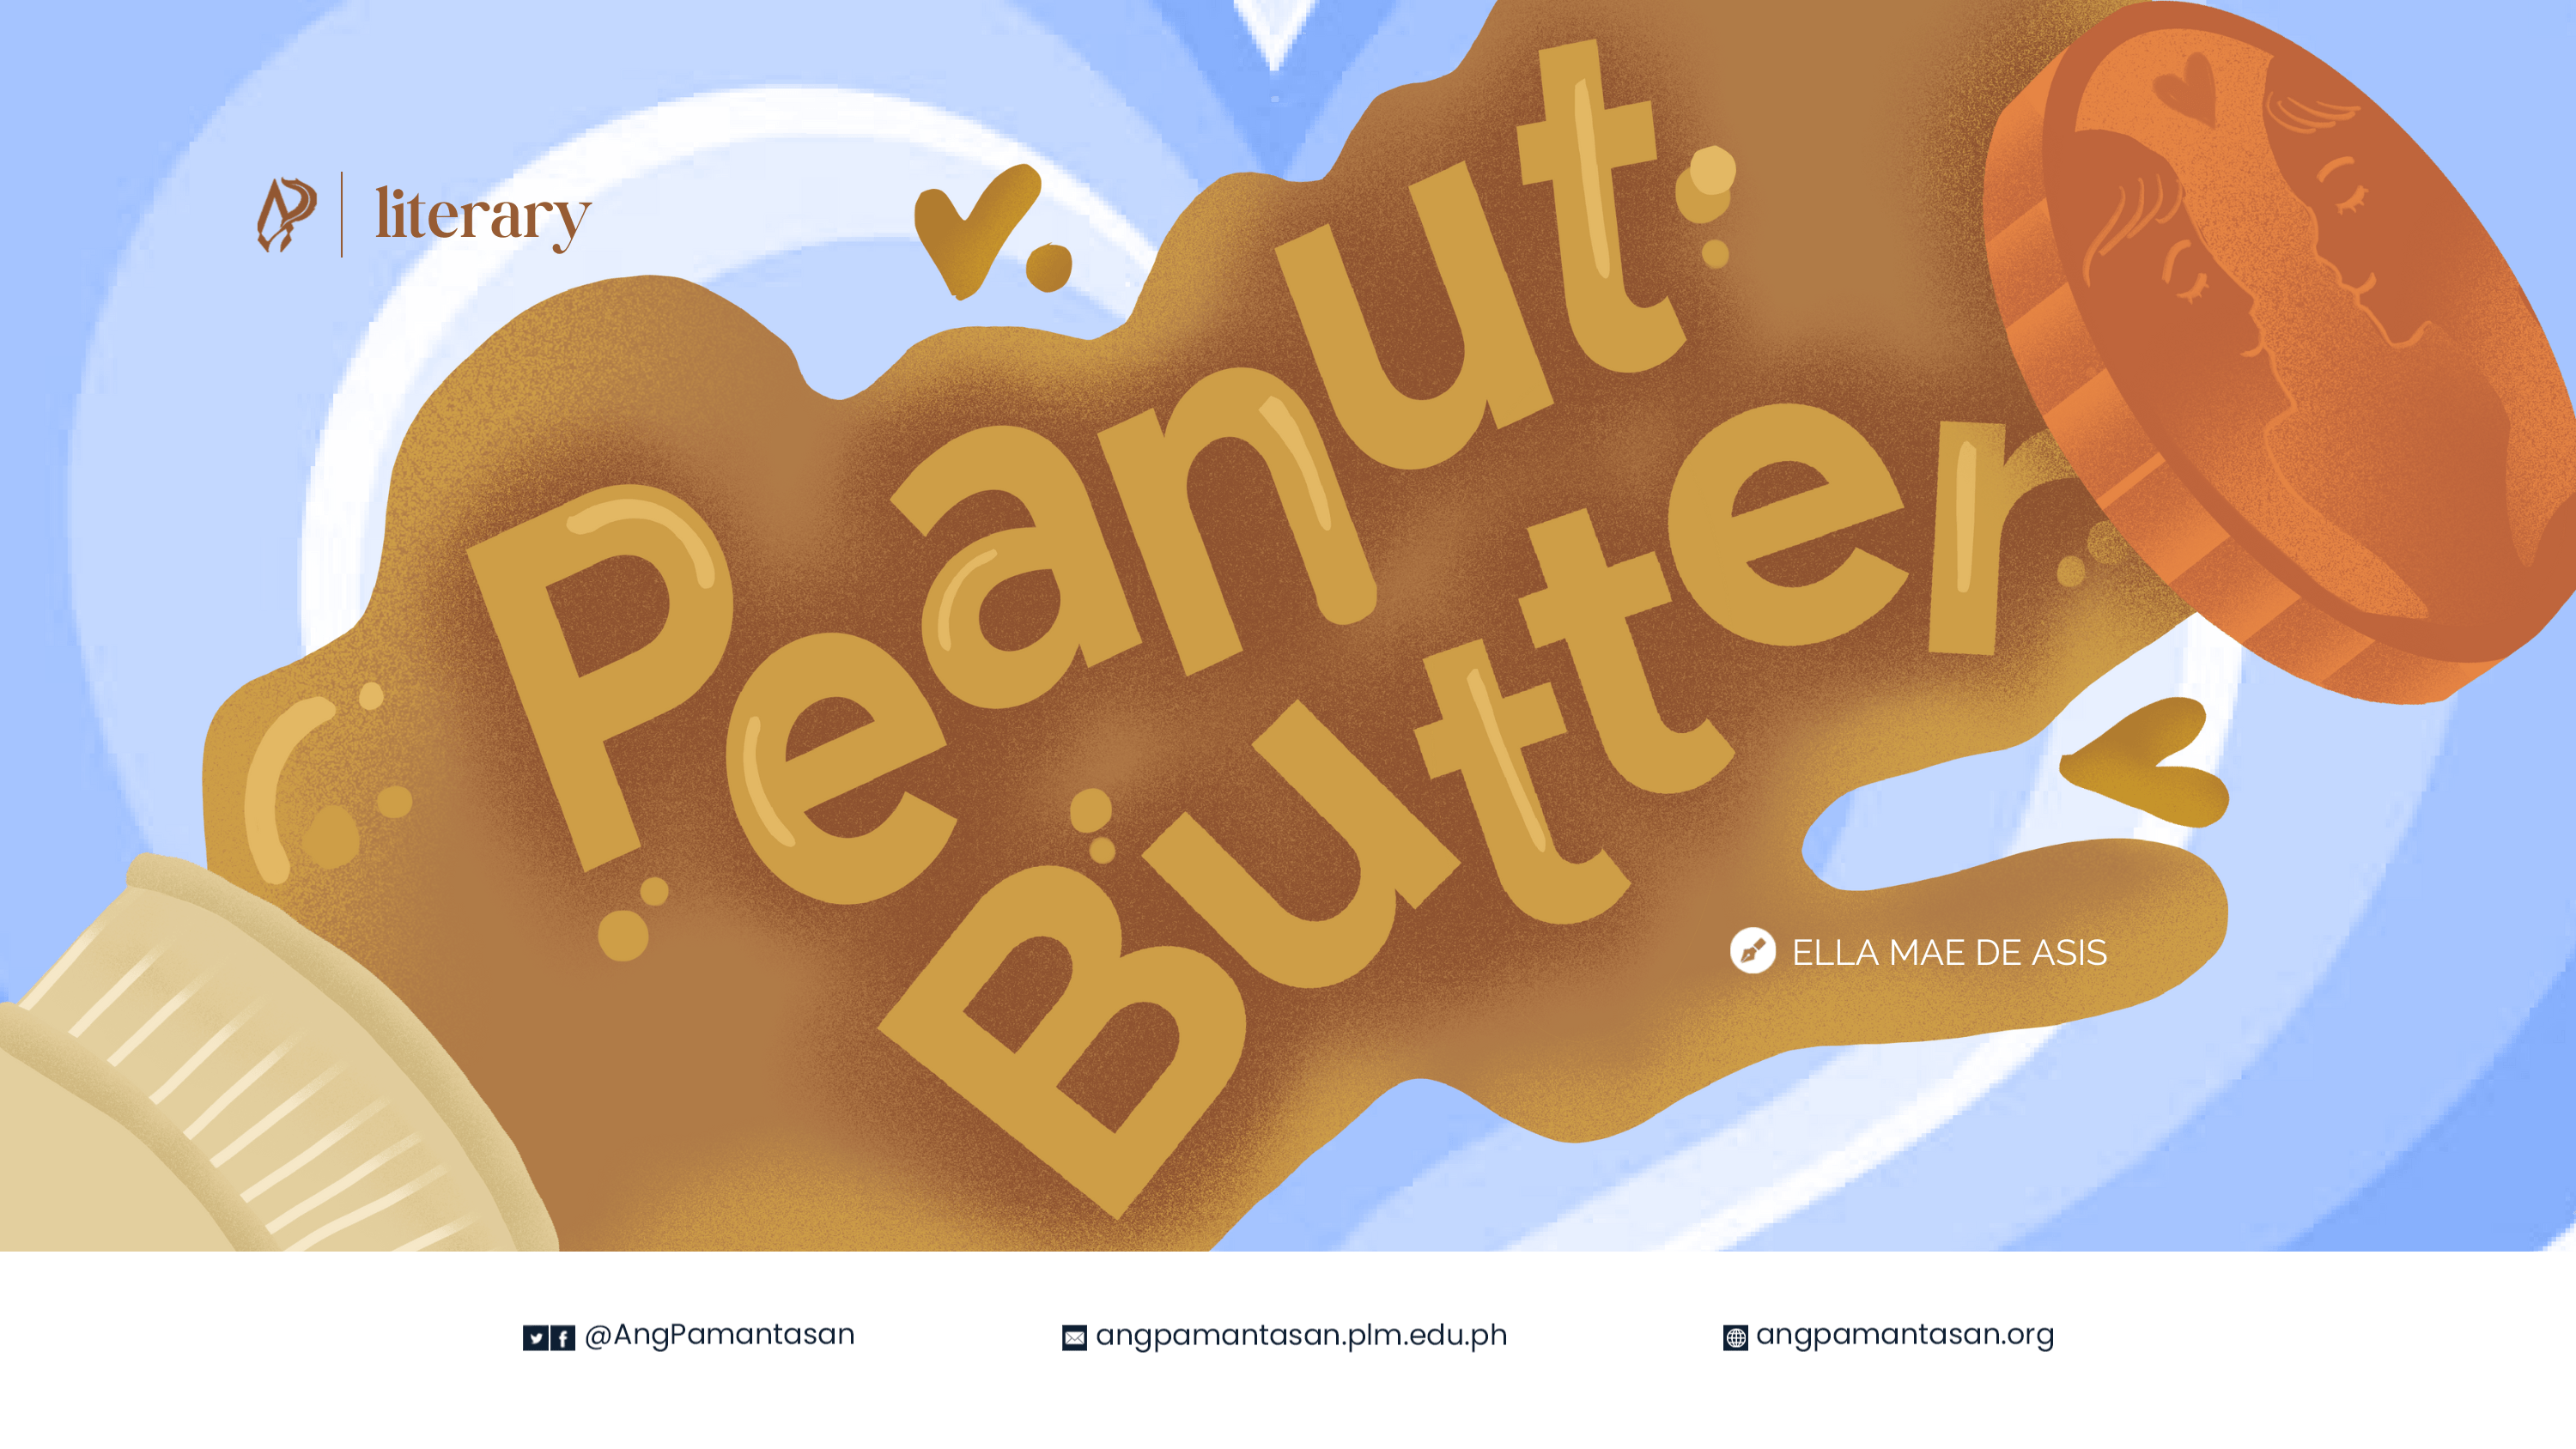 Peanut Butter cover